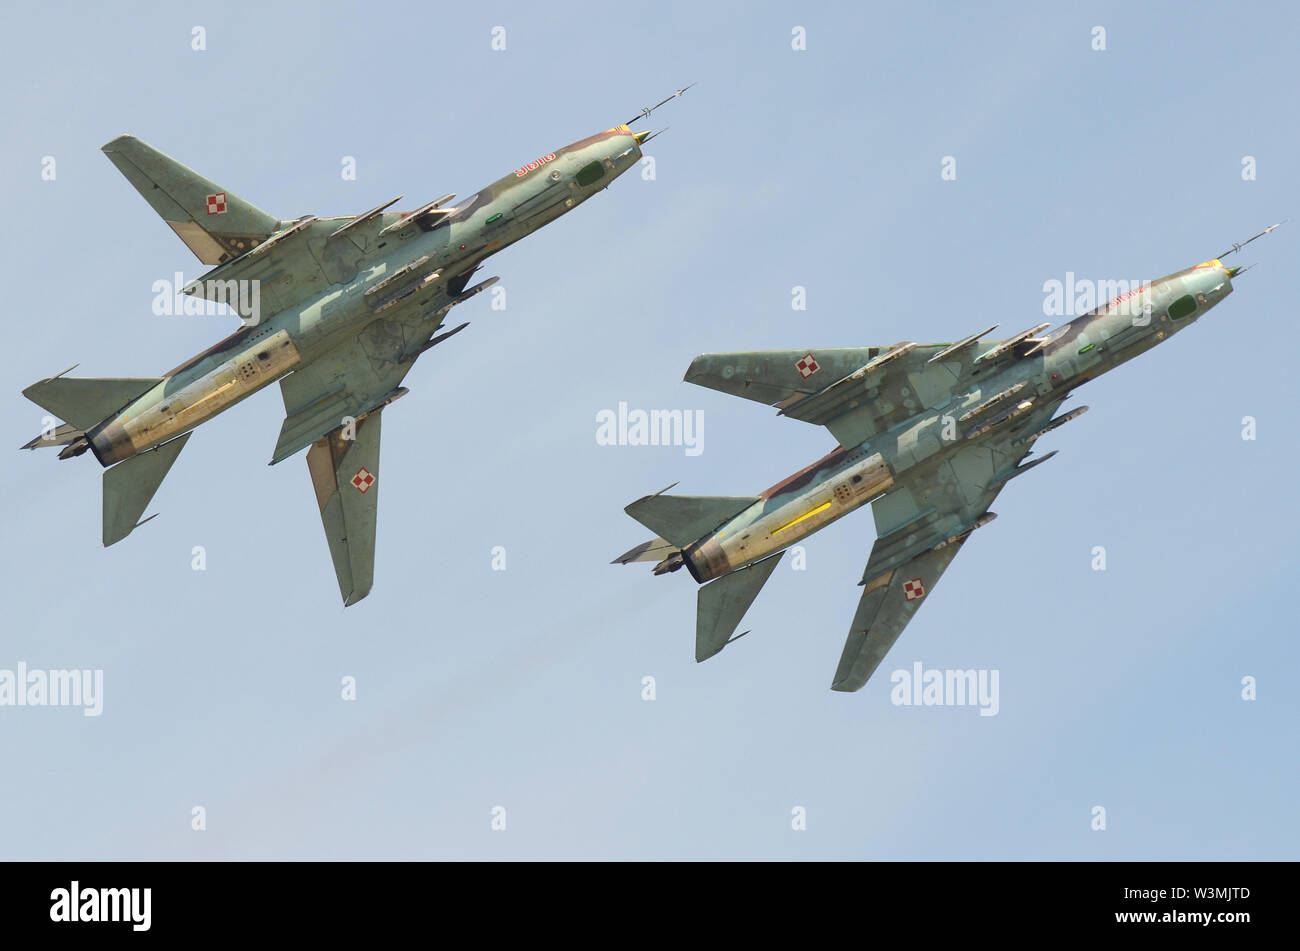 Sukhoi Su-22 (NATO reporting name: Fitter) is a Soviet fighter-bomber. Polish Air Force. Used by Eastern Bloc. Soviet Cold War era. Variable geometry Stock Photo